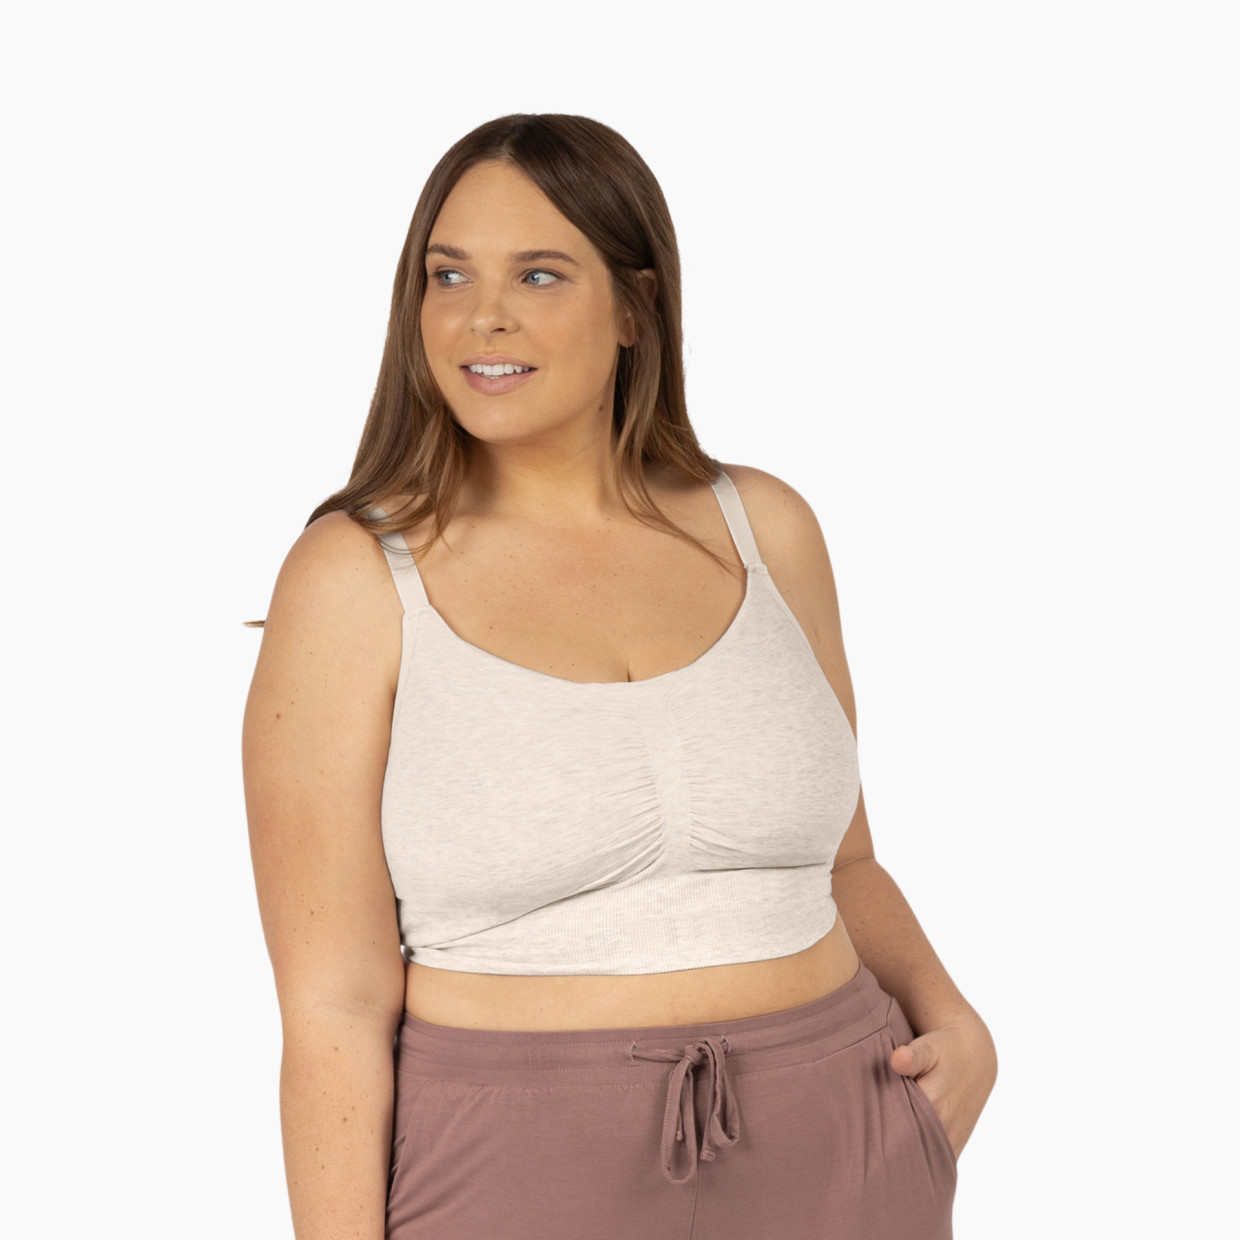 Kindred Bravely Sublime Bamboo Hands-Free Pumping Lounge & Sleep Bra - Oatmeal Heather, Small-Busty.